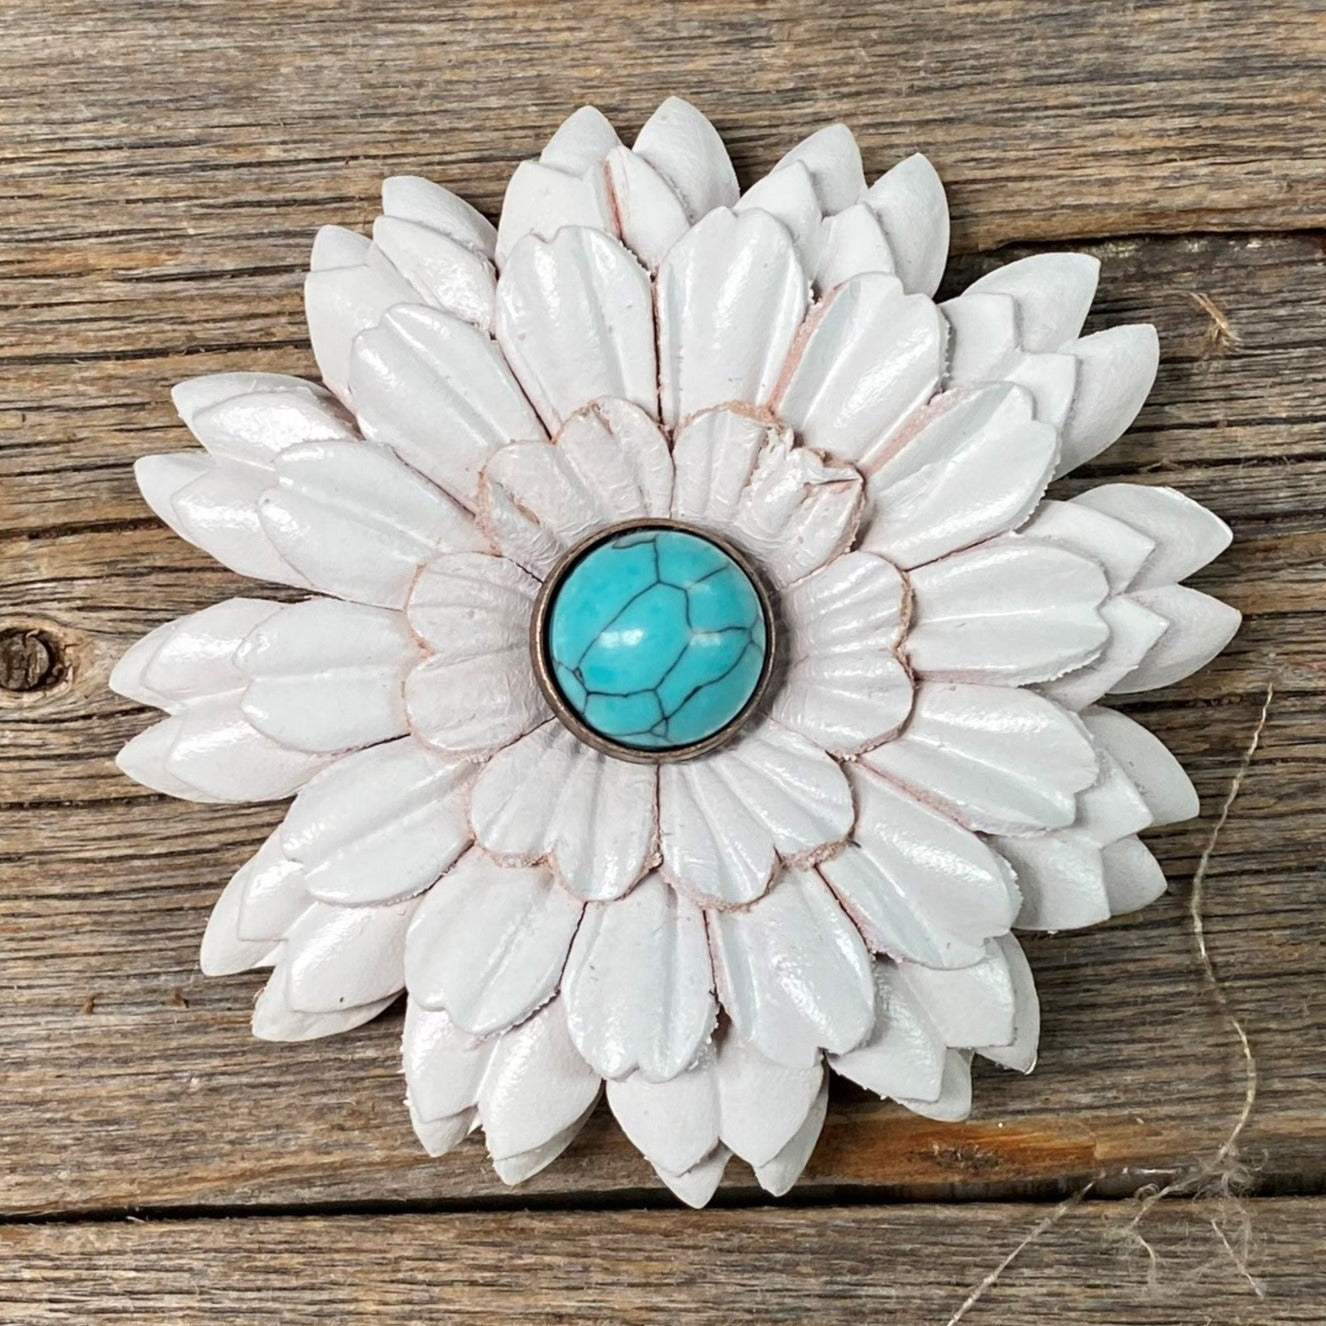 White Daisy Flower With Round Turquoise Cabochon